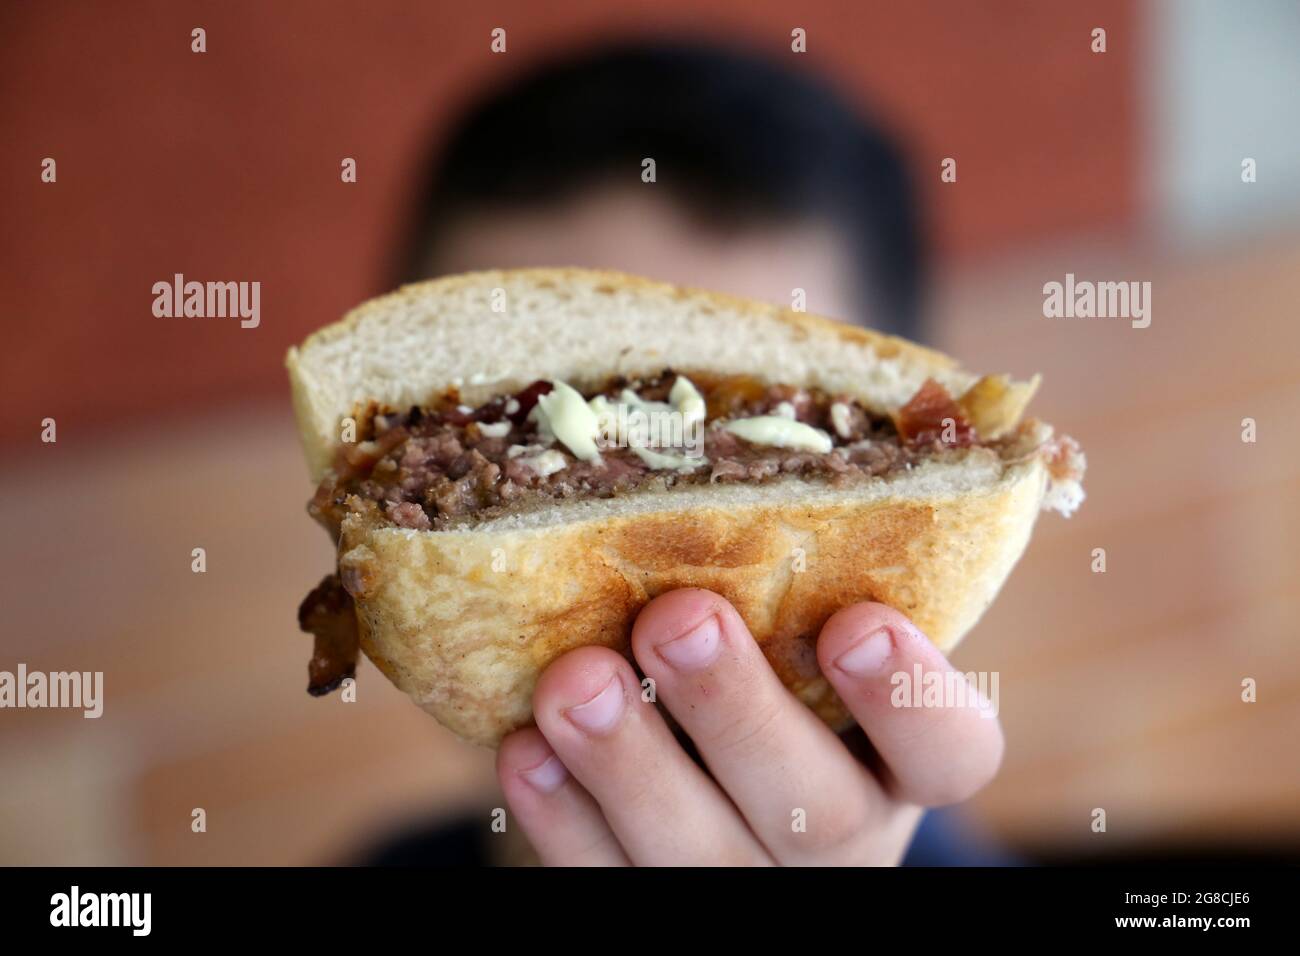 child's hand holding a burger in front of the camera. Stock Photo